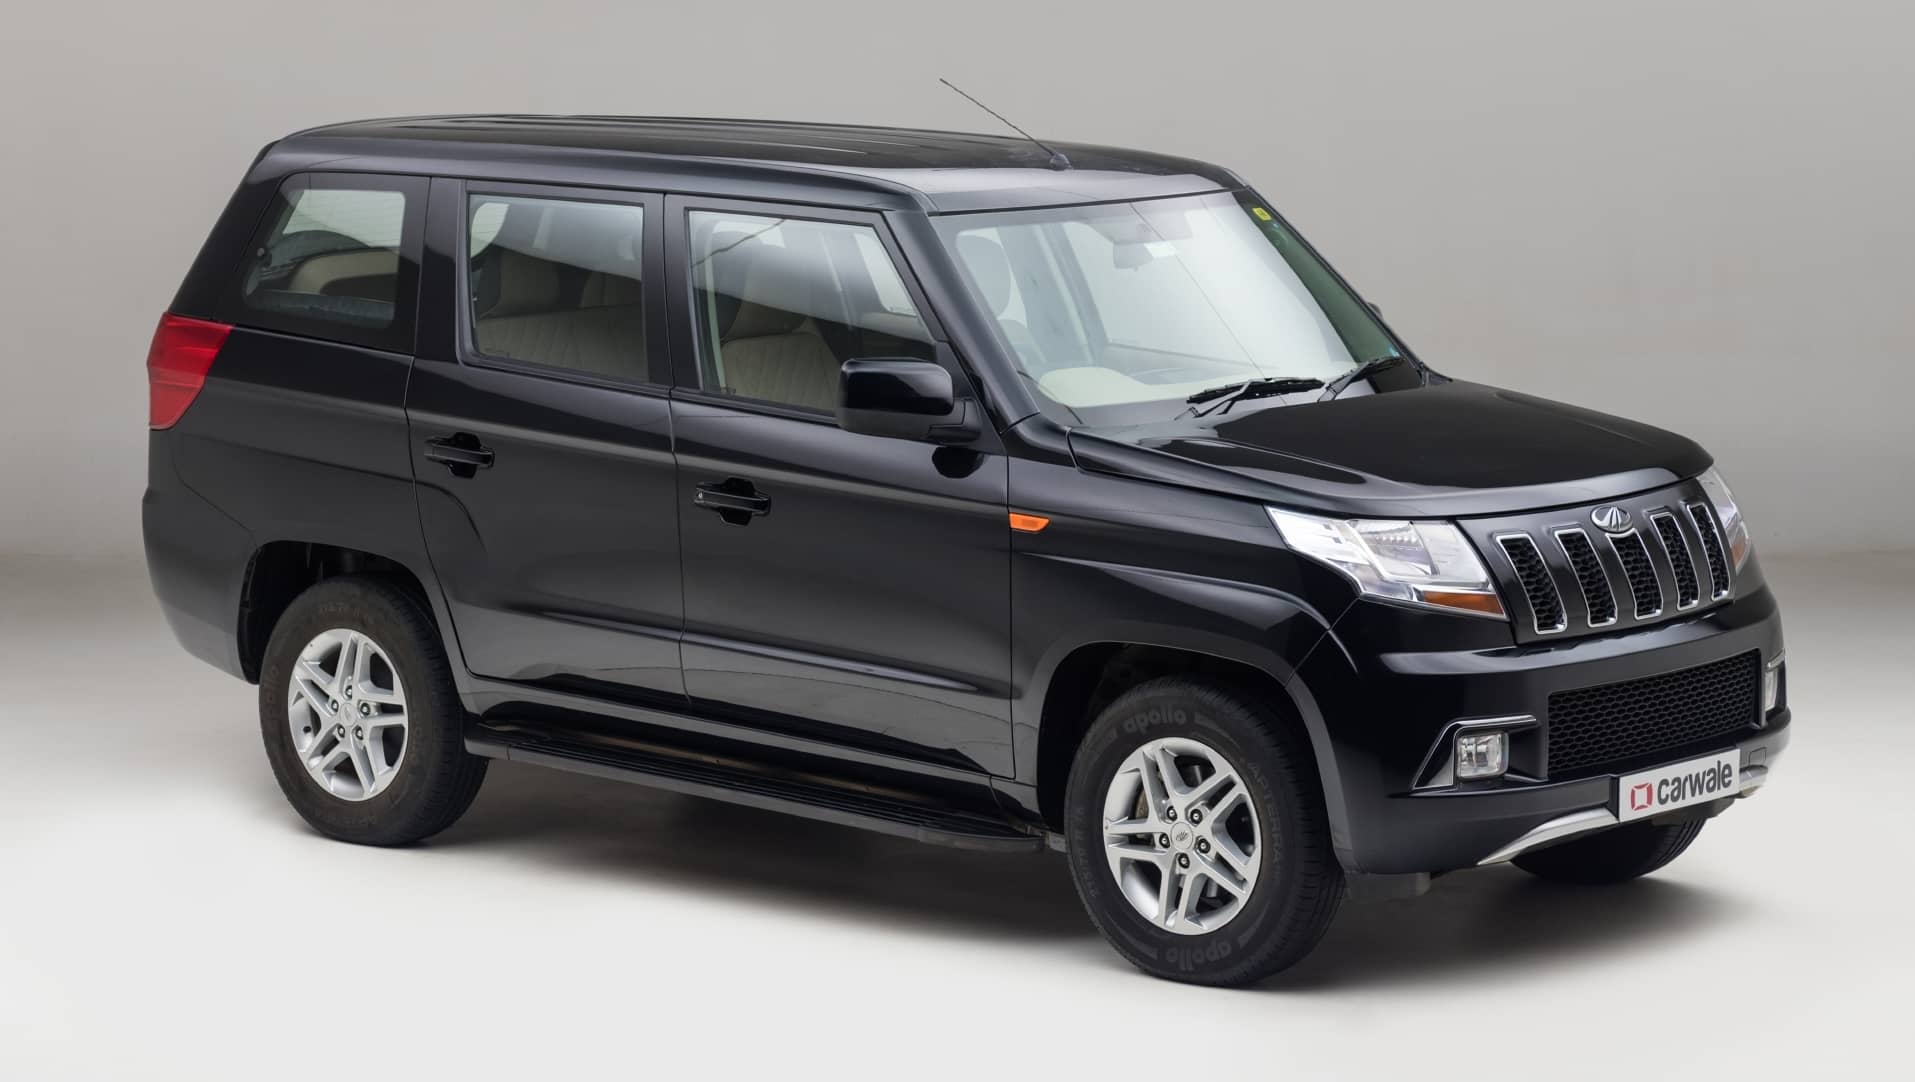 Top 9/10 Seater Vehicles in India List of 9/10 Seater Cars in India